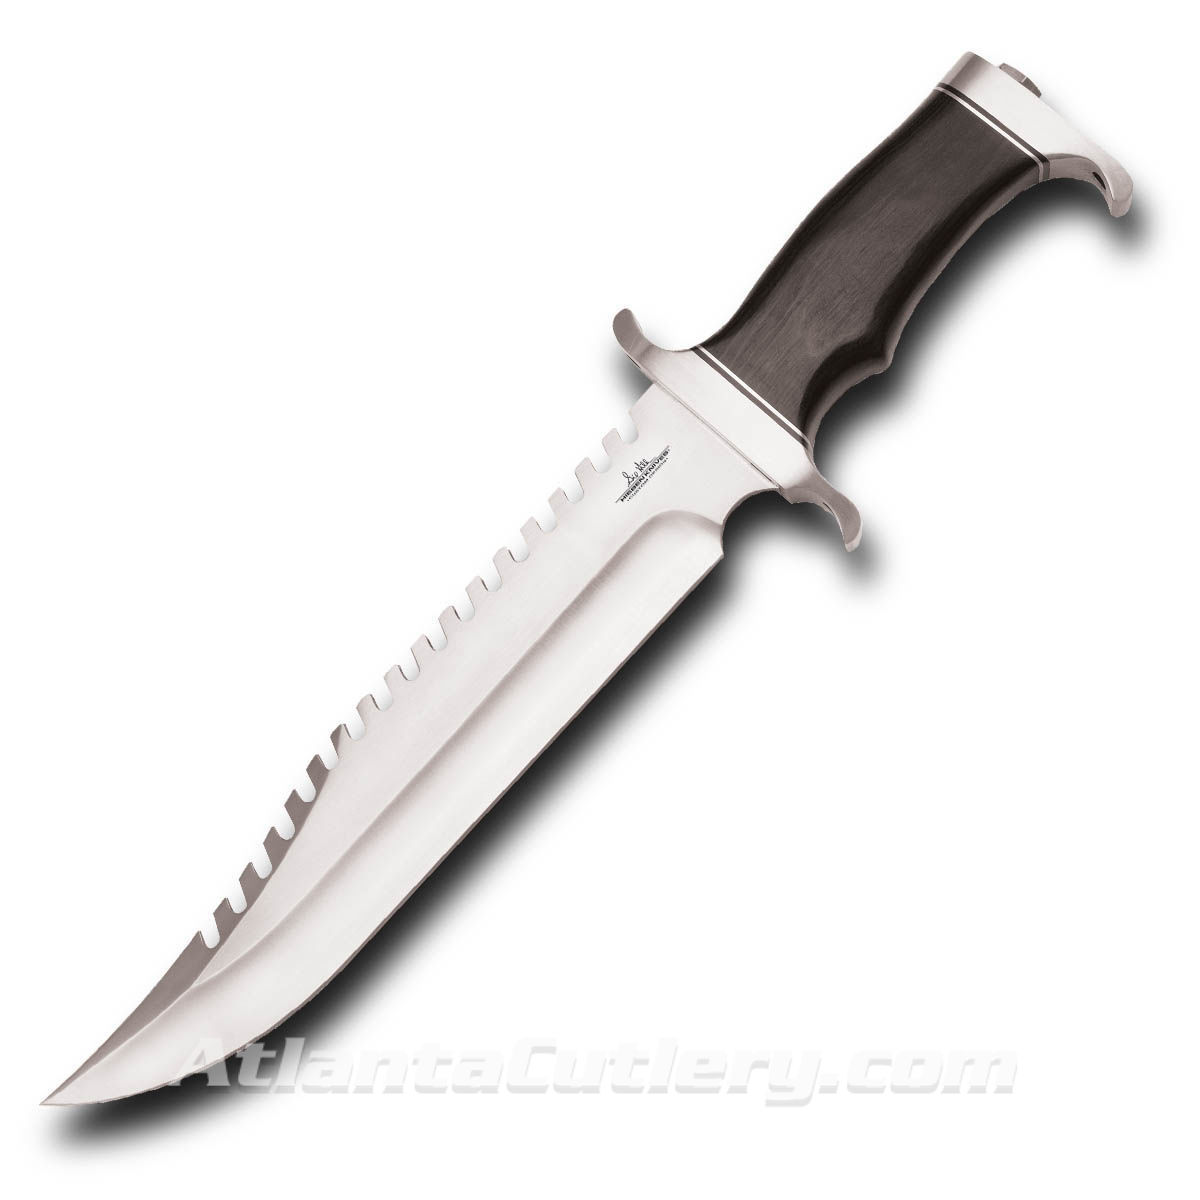 Gil Hibben Extreme Survival Bowie Knife has razor-sharp 7Cr17 stainless steel blade with sawback teeth